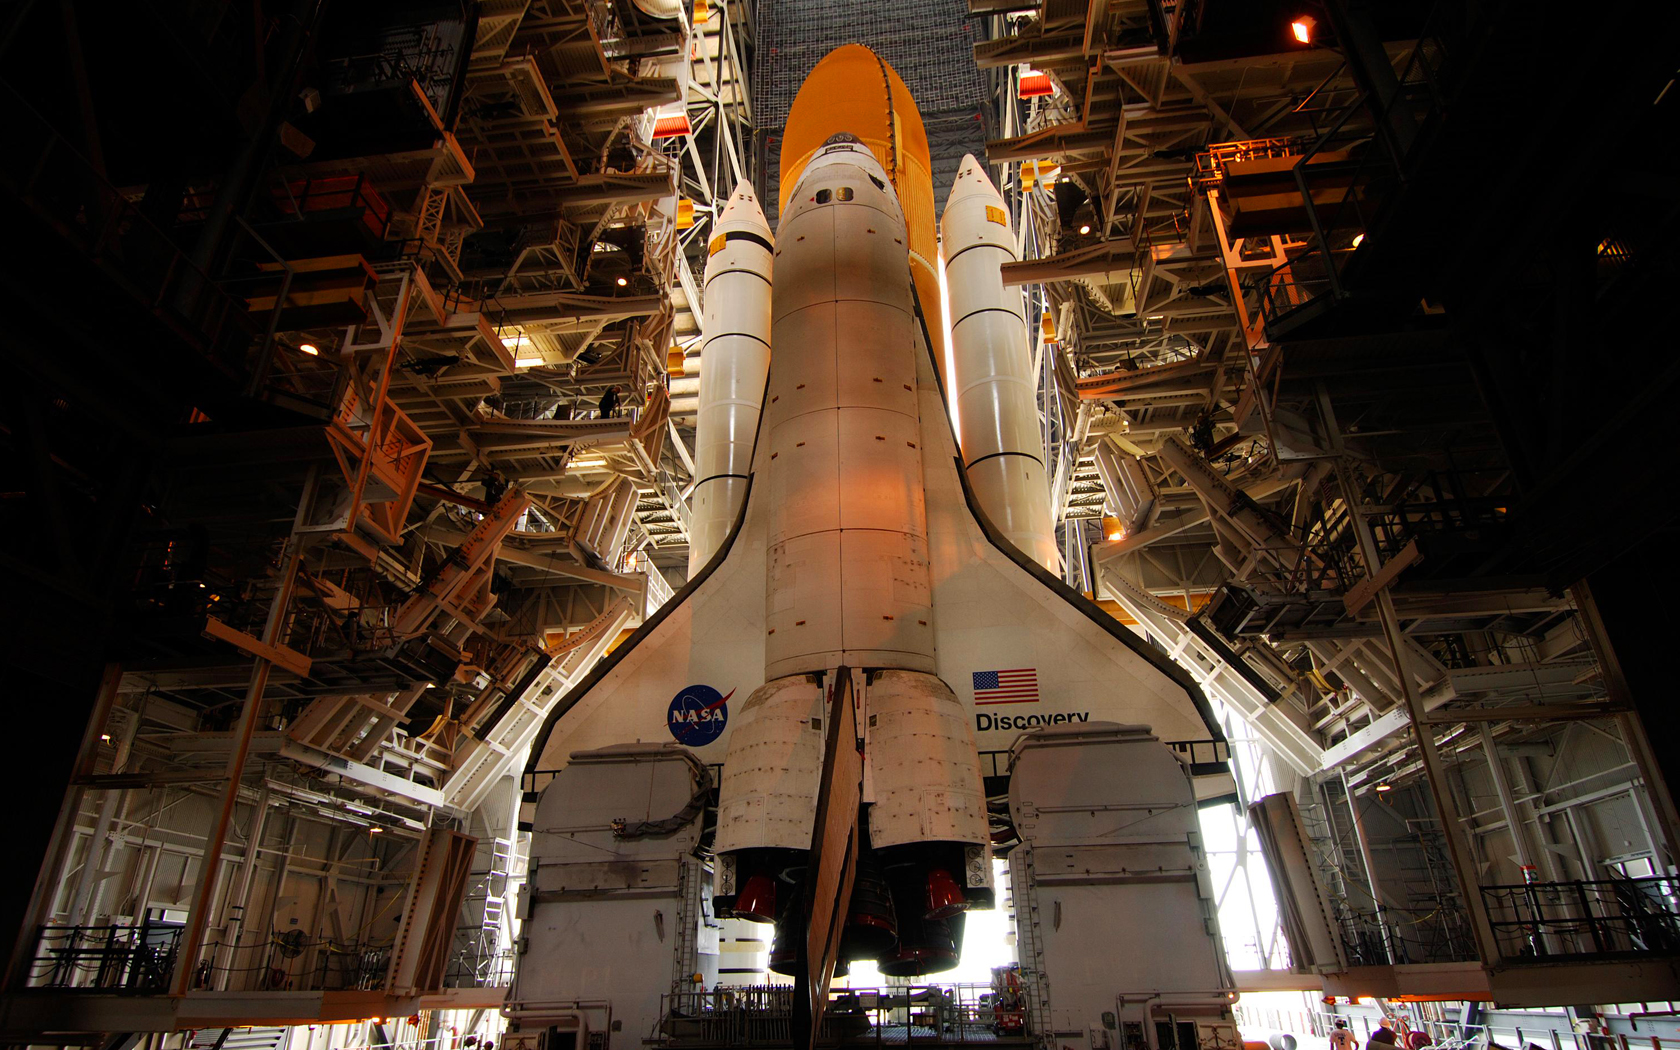 Vehicles Space Shuttle Discovery 1680x1050